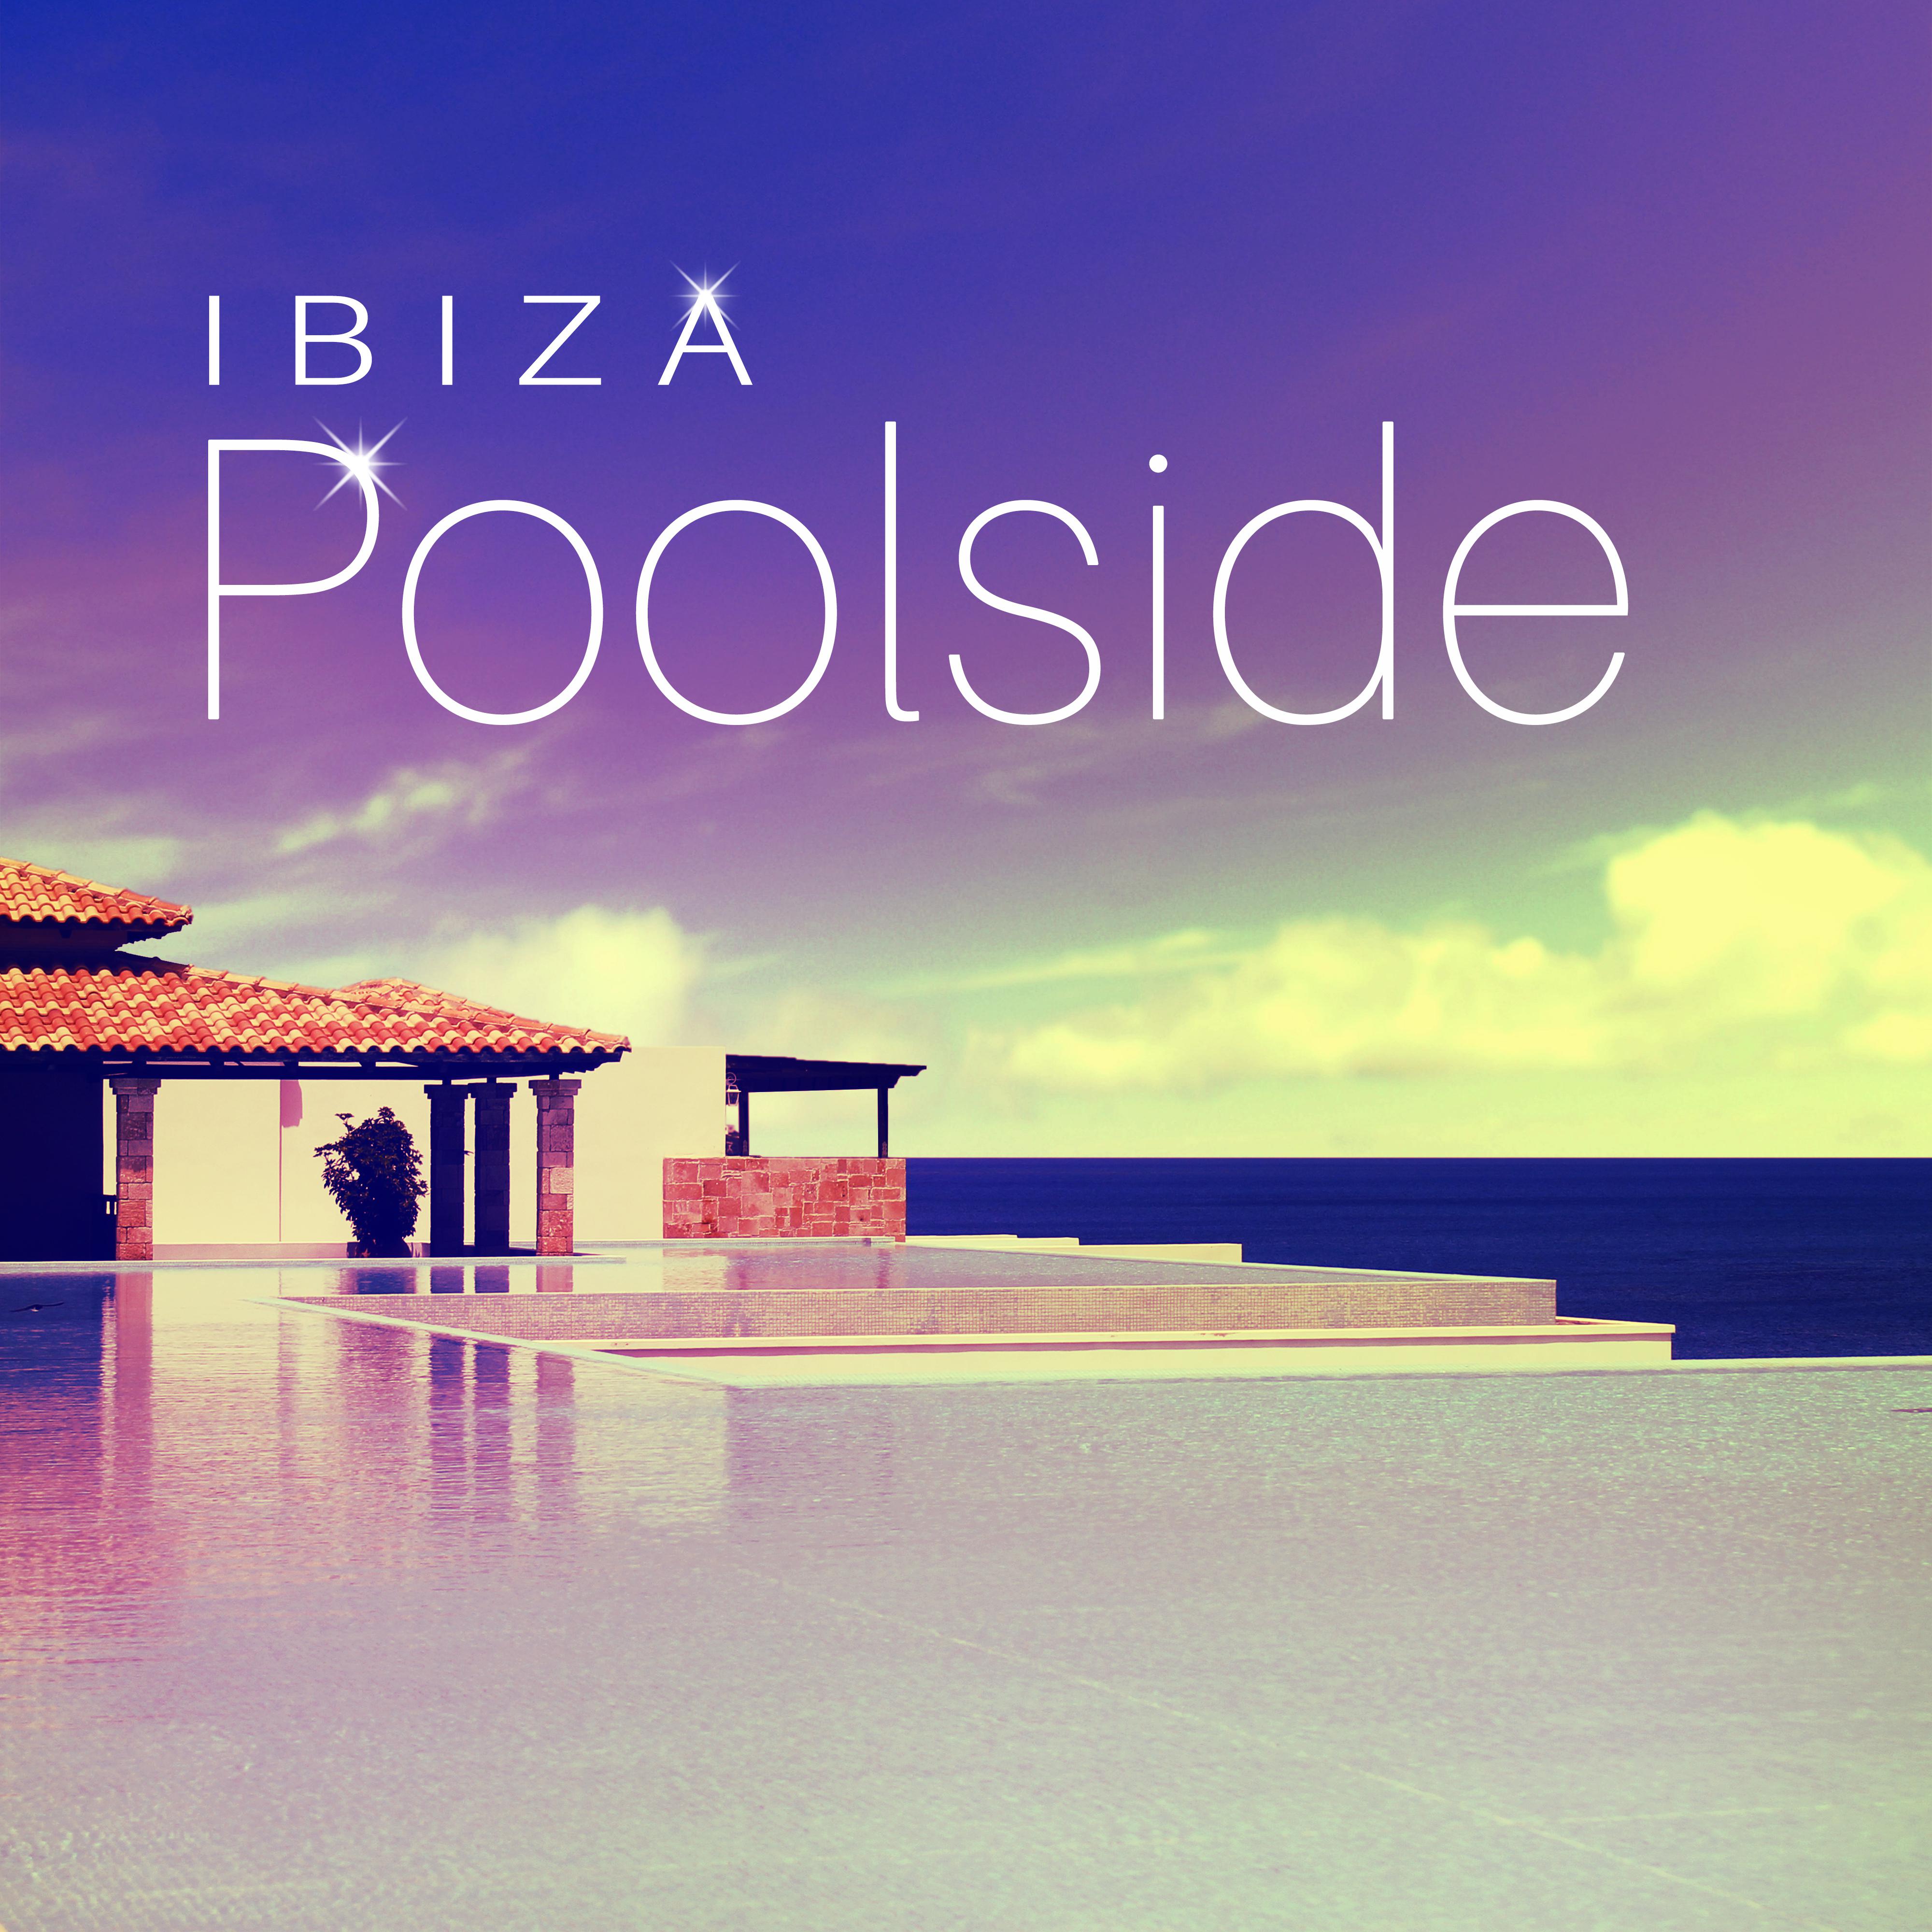 Ibiza Poolside – Summer Chill Out, Calm Down, Relax, Summer Beats, Music After Work, Lounge Summer, Ambient Music